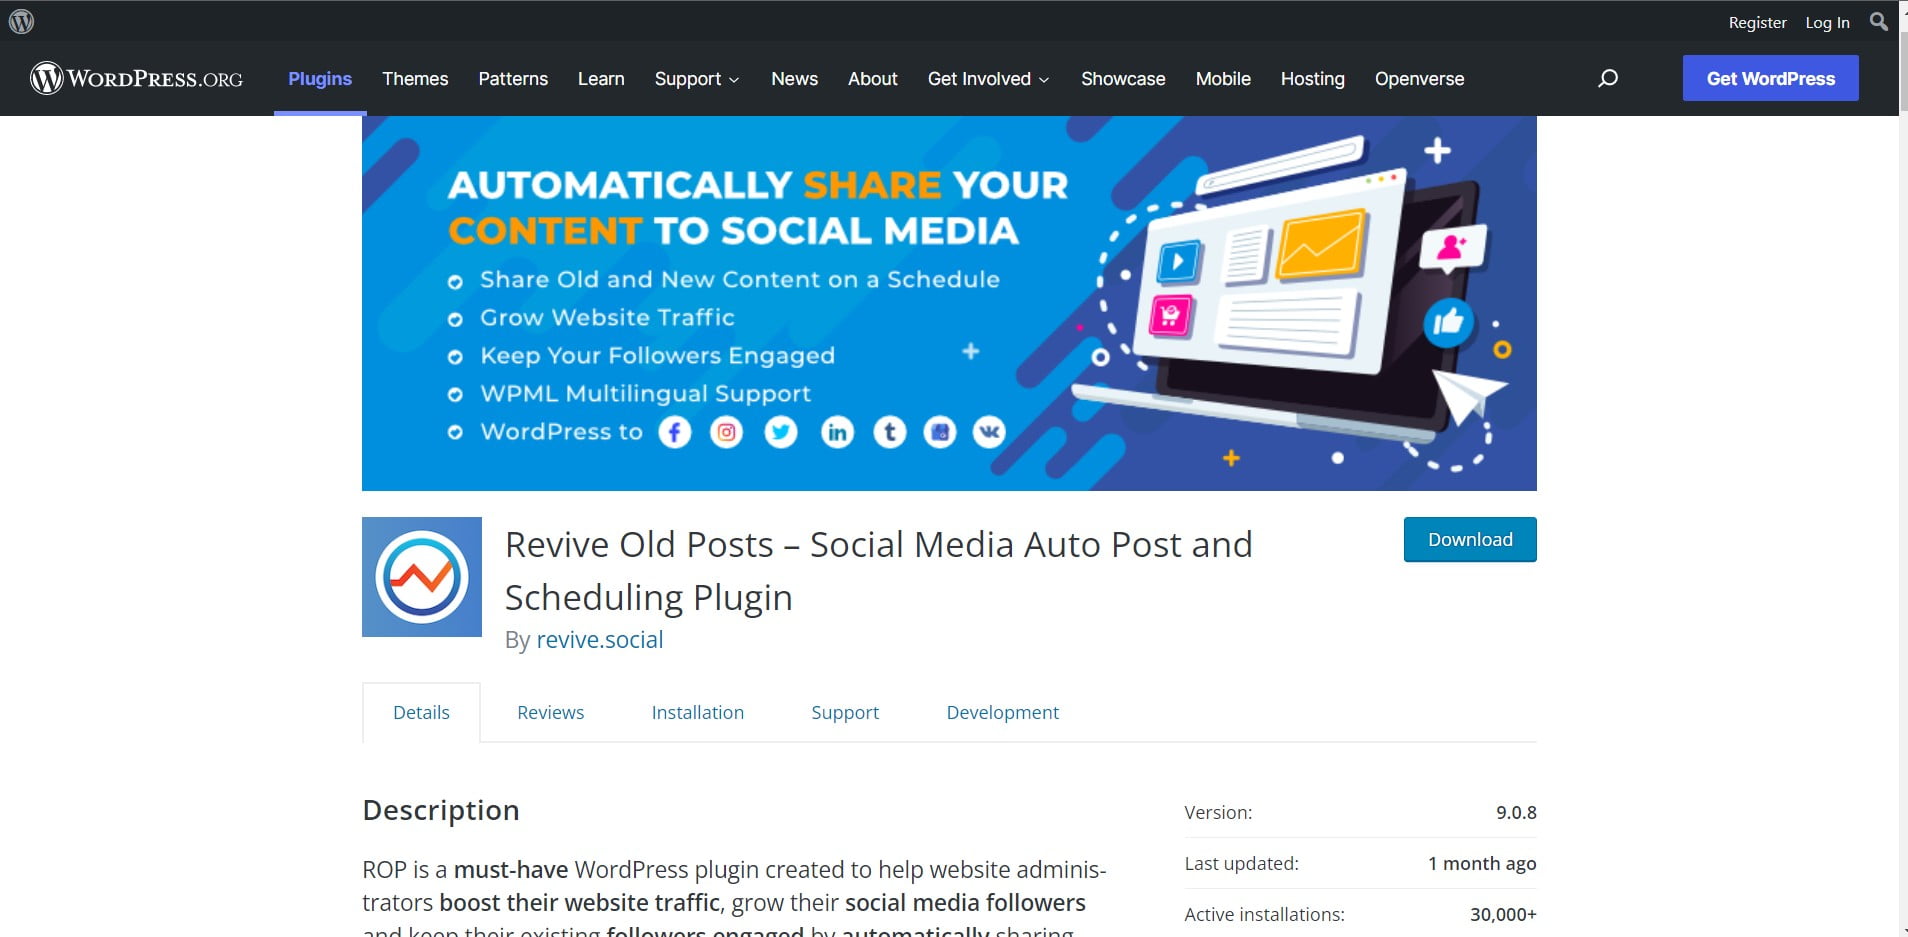 Revive Old Posts, An automation plugin
WordPress plugins for social media automation